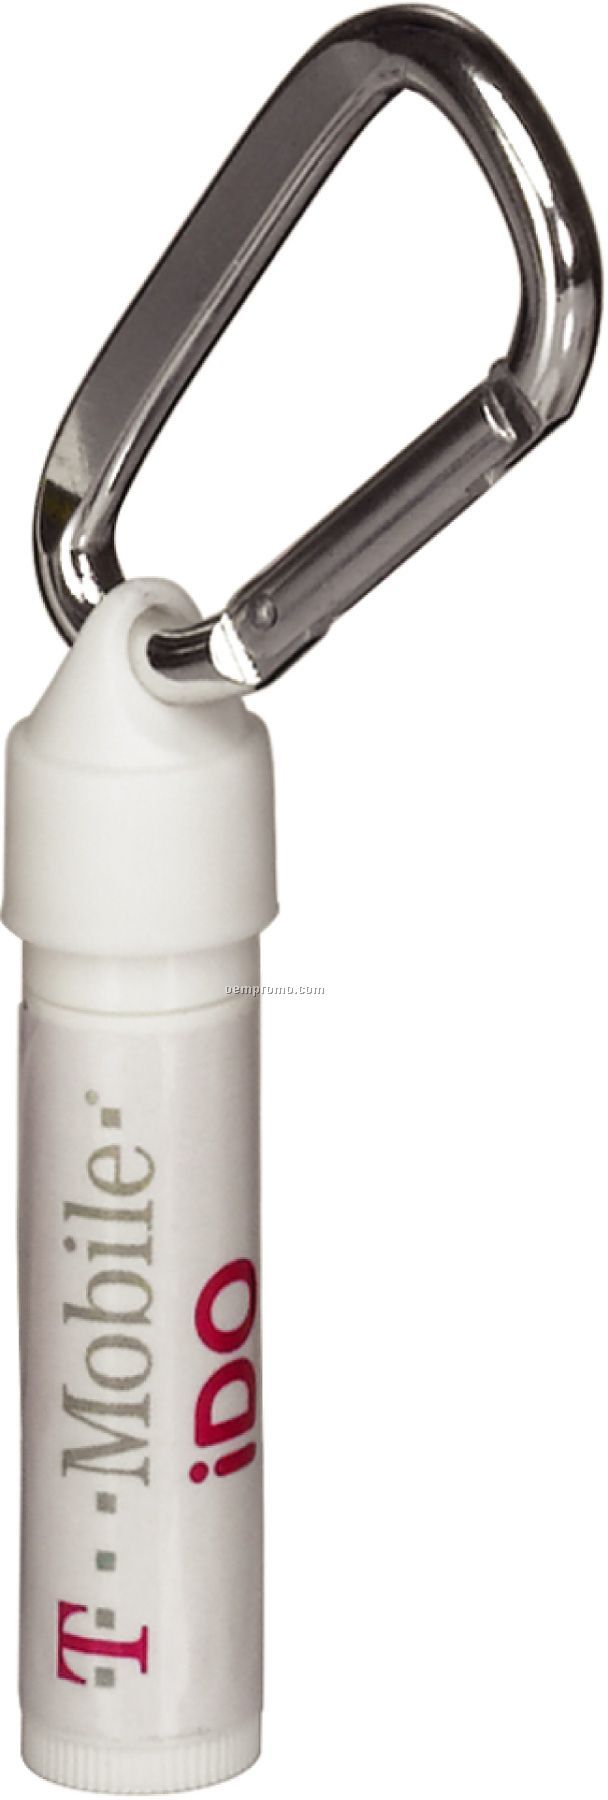 Natural Lip Balm In White Tube With Carabiner Clip